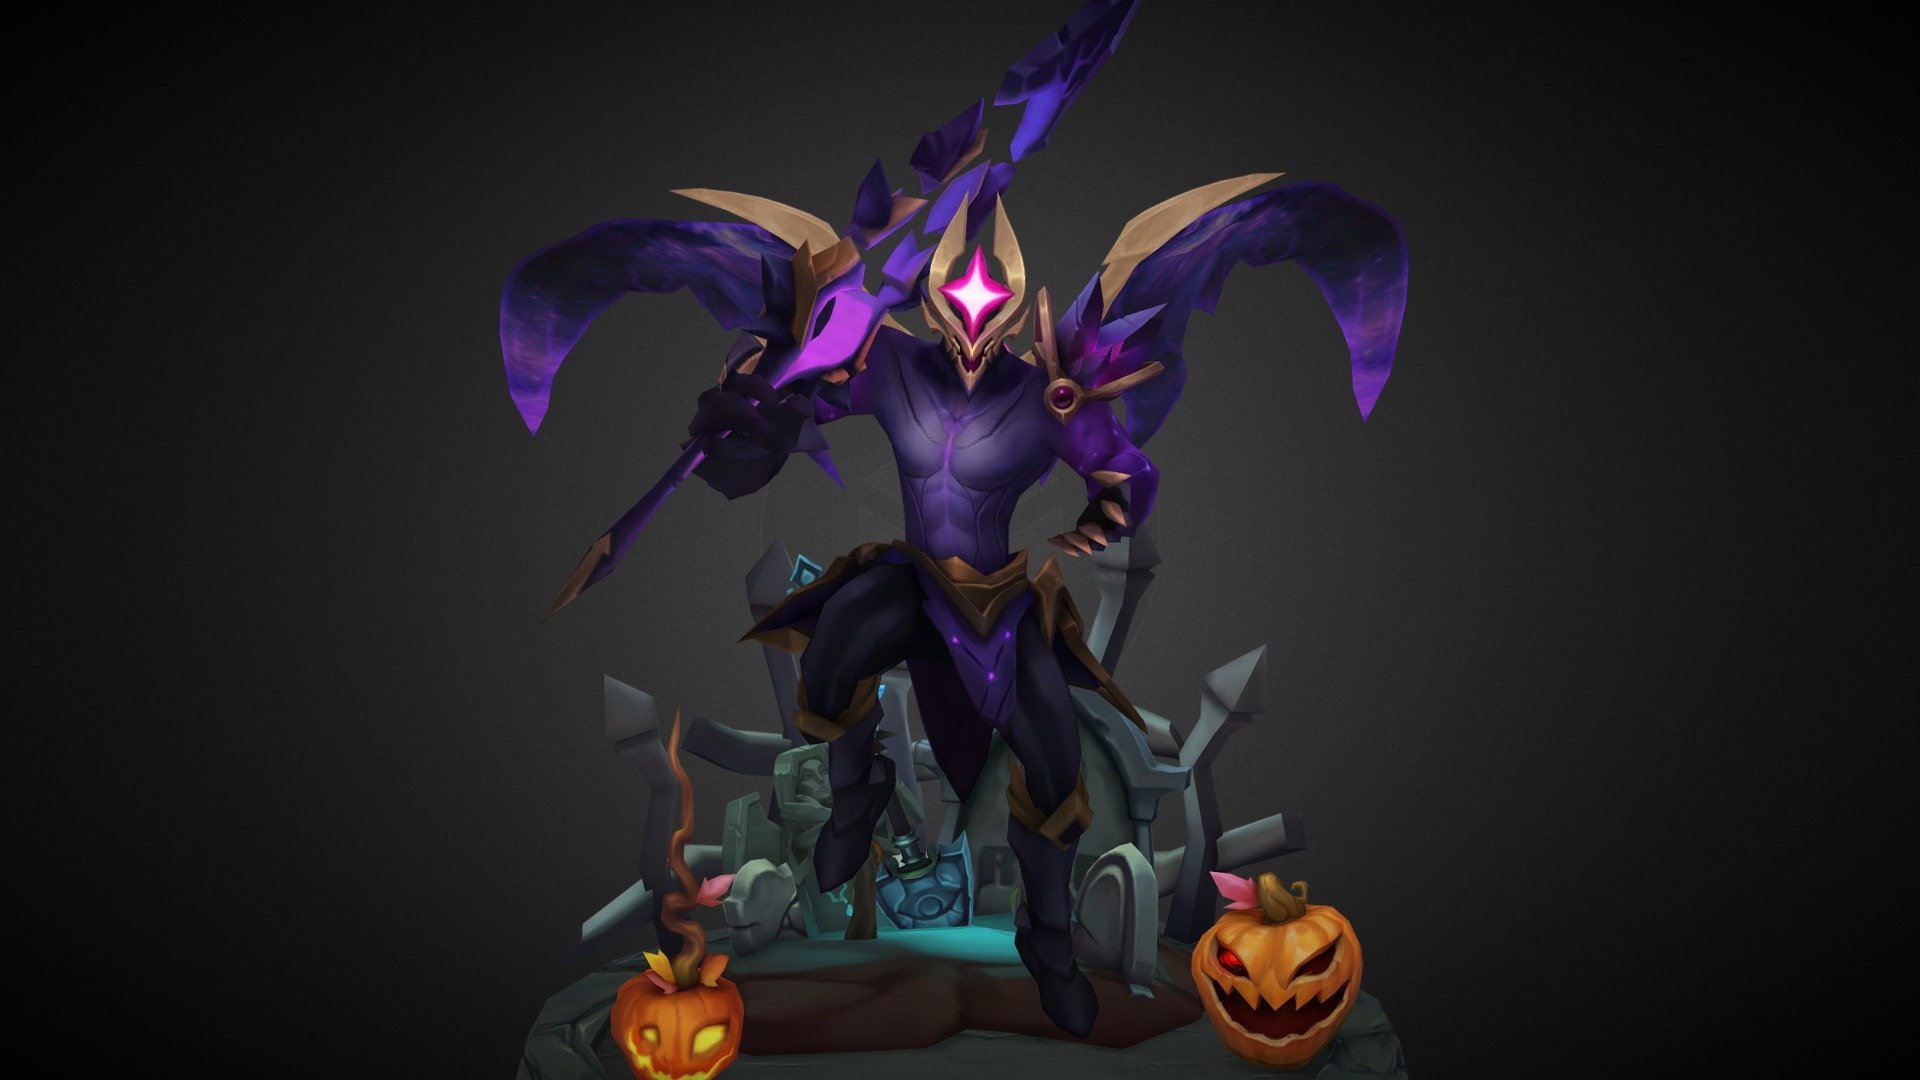 Joining in on Skintober 2020, not with drawings, but models to possible future custom skins!
I'm following the prompt list by RaiPhantom and KateyAnthoney 

Done with Maya 2018 and Photoshop. The Podium was done with the help of Damonix.

Parts used: Odyssey Aatrox, Dark Star Mordekaiser, Dark Star Xerath, Dark Star Jarvan IV, Dark Star Thresh © Riot Games

Support me on Ko-Fi if you want :)
https://ko-fi.com/yoruqueenofnight - Skintober 2020 Day 1: Dark Star Aatrox - 3D model by Yoru Skins (@YoruSkins) 3d model